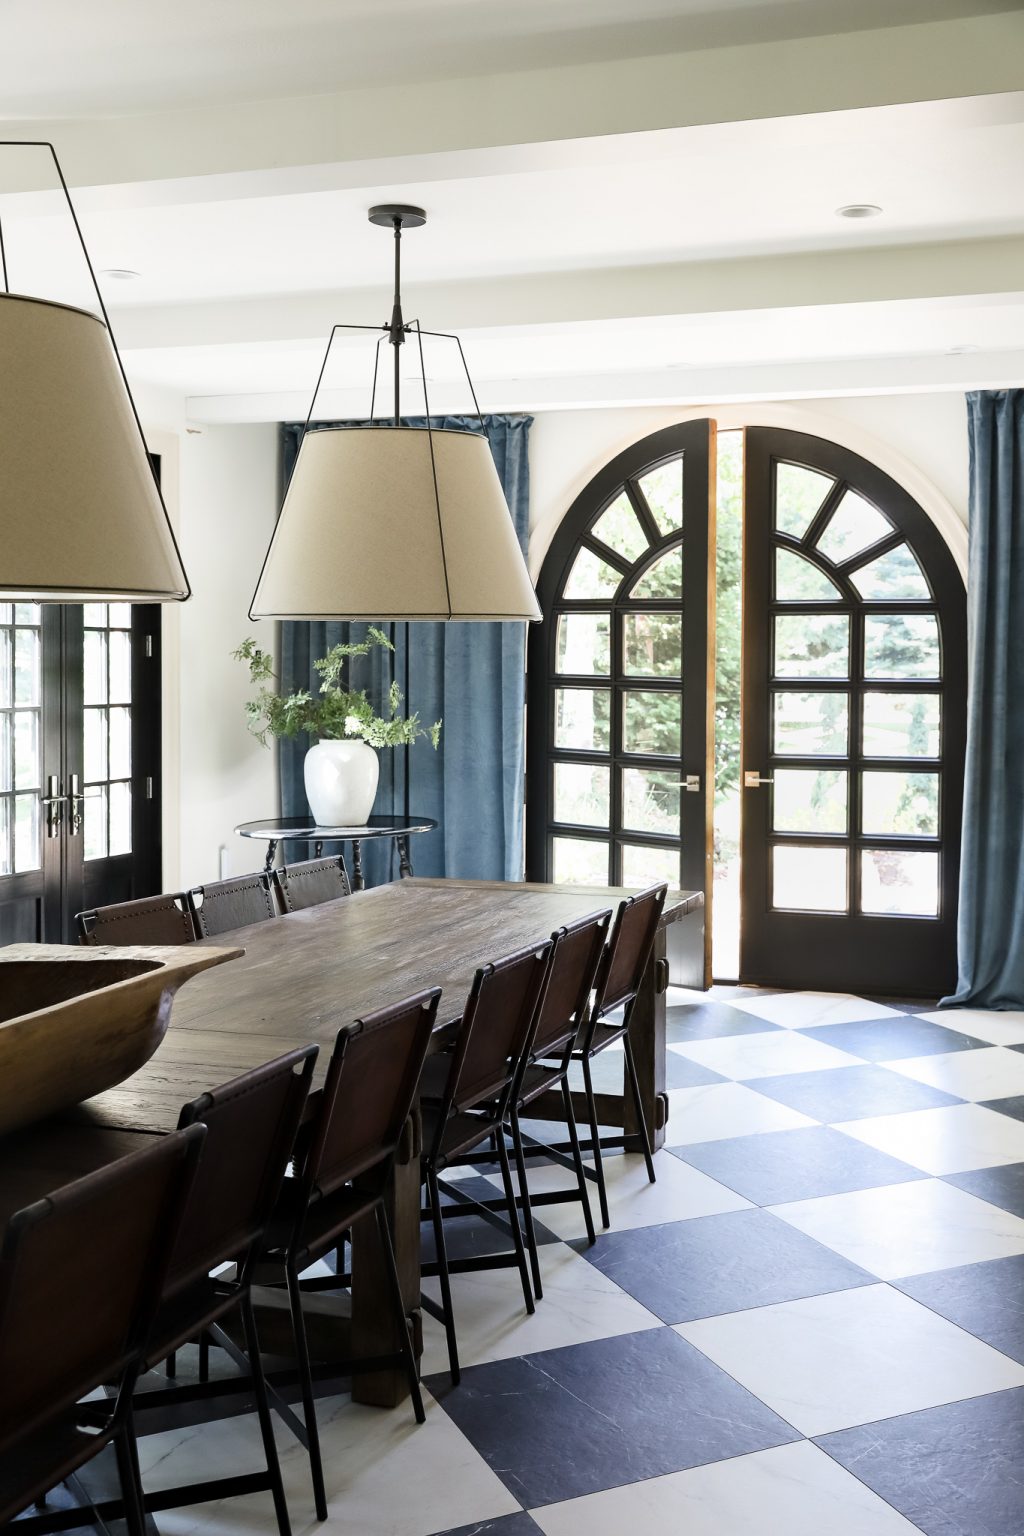 European style dining room with black and white tiled floor and arched wood doorway from Chris Loves Julia #diningroom #diningroomdecor #diningroomideas